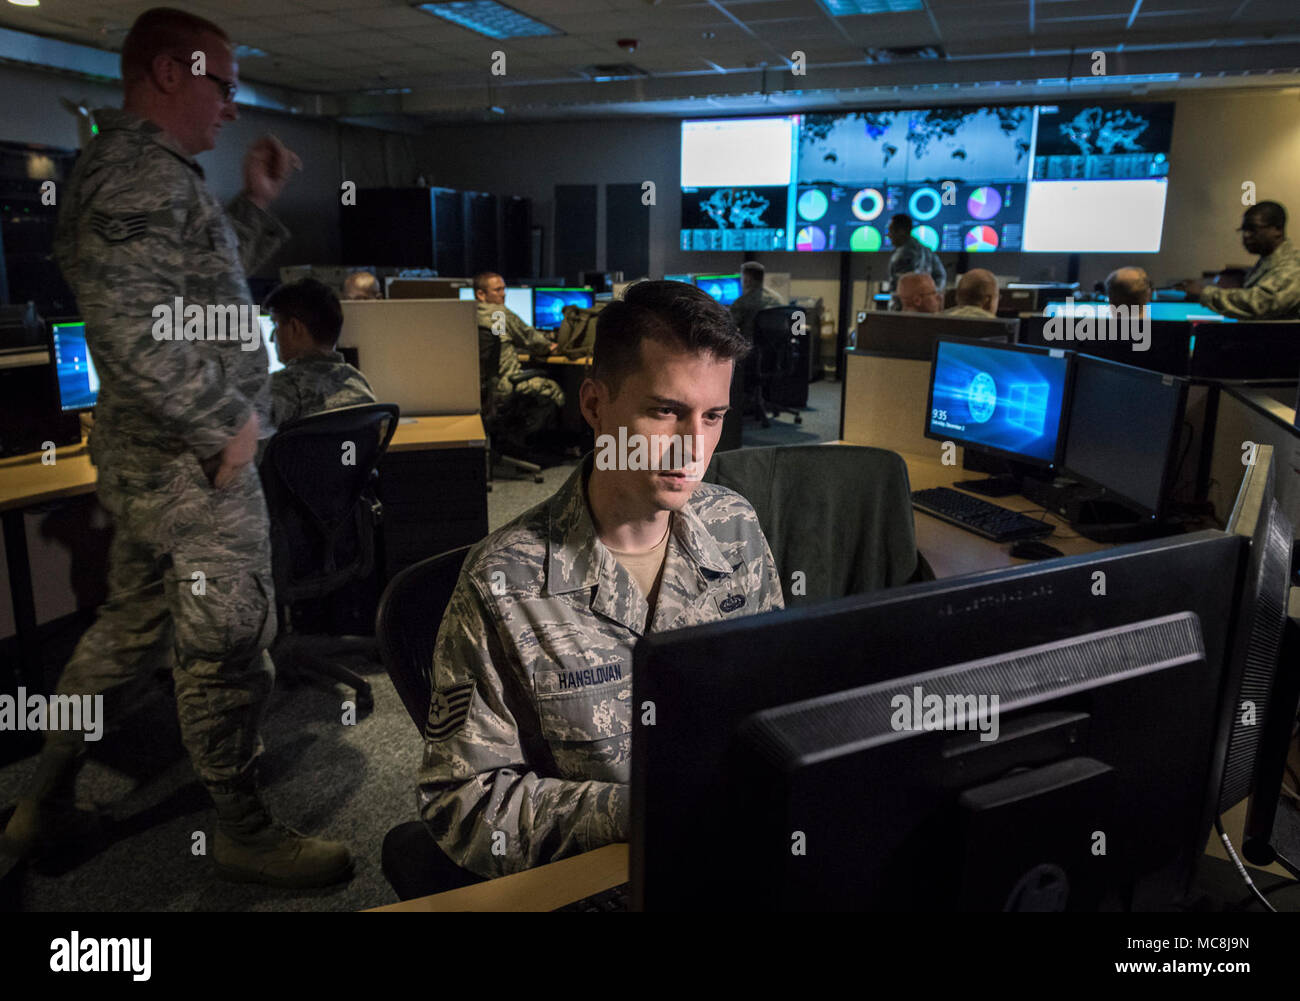 Tech. Sgt. Kyle Hanslovan, a cyber-warfare specialist serving with the 175th Cyberspace Operations Group of the Maryland Air National Guard, works in the Hunter's Den at Warfield Air National Guard Base, Middle River, Md., Dec. 2, 2017. Hanslovan served on active duty with the Air Force for six years and then worked, in civilian life, as a cyber-security contractor for the Department of Defense and now as the CEO of a cyber-security startup firm. His continuing desire to serve his country led him to the Air National Guard, where he believes his civilian experience in defensive cyber-security g Stock Photo